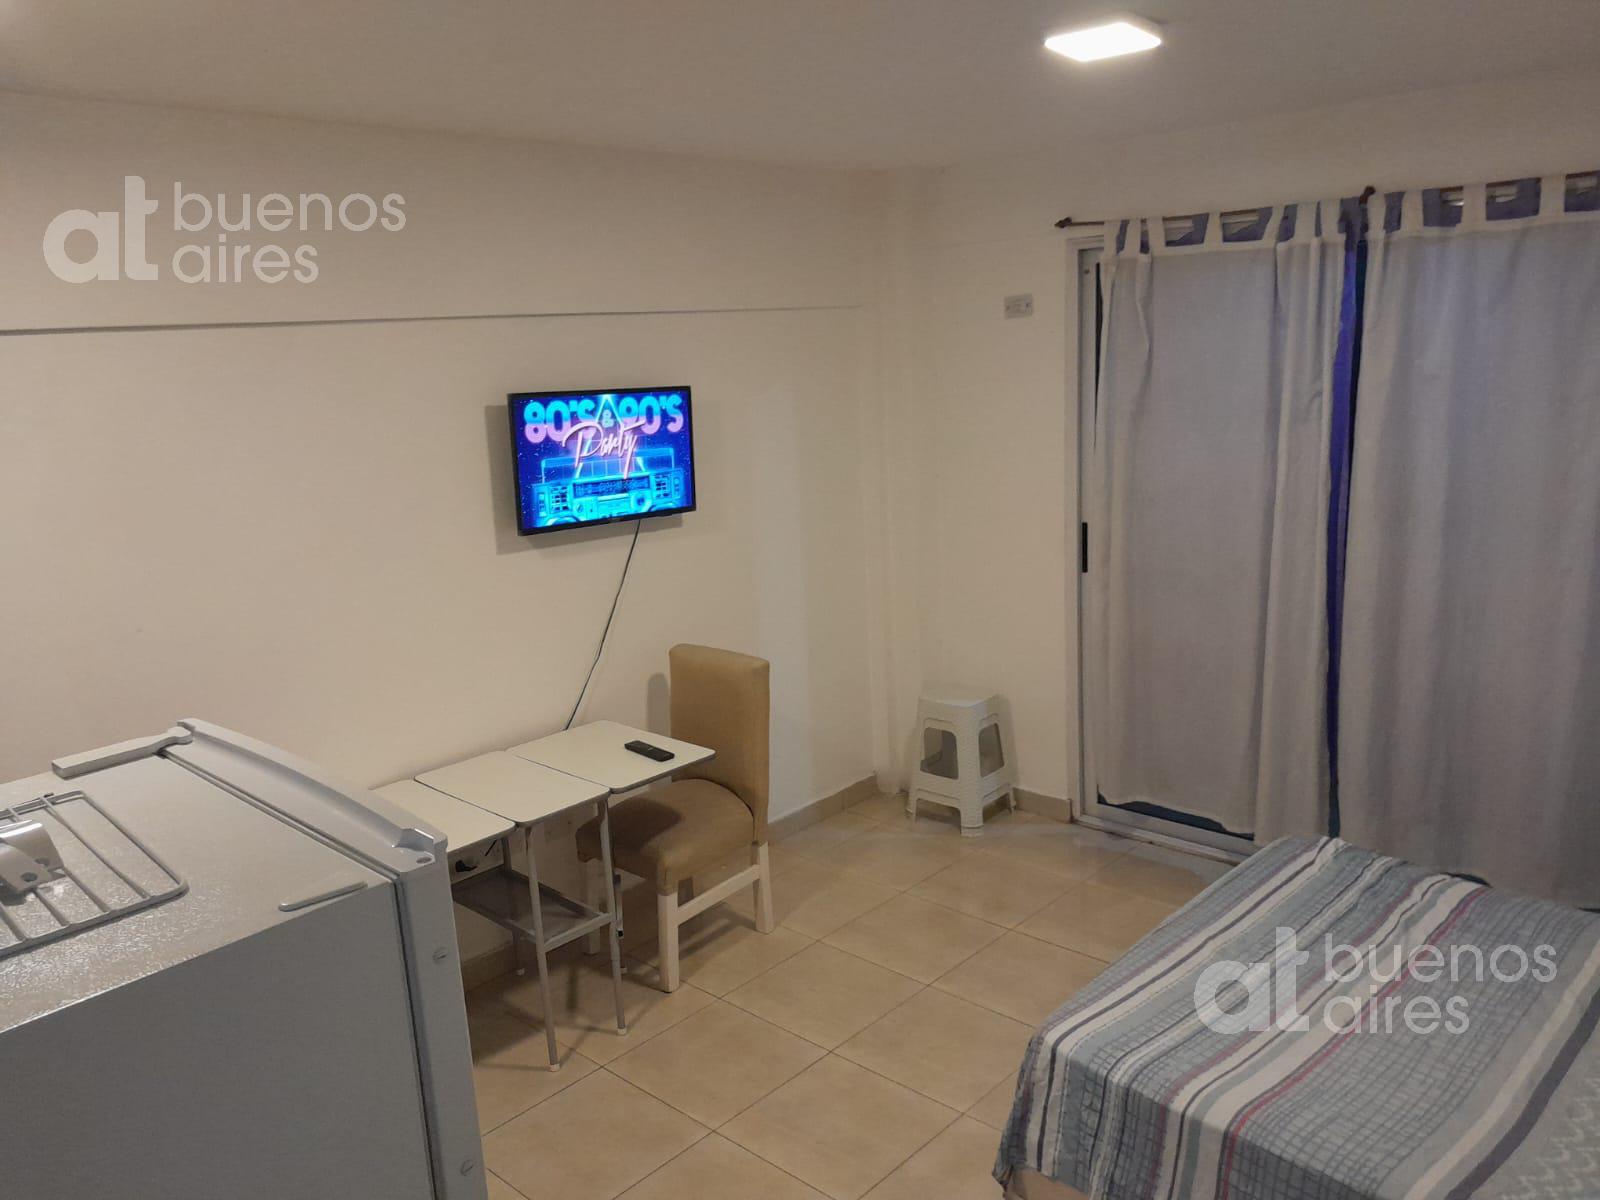 #5110606 | Temporary Rental | Apartment | Flores (At Buenos Aires)